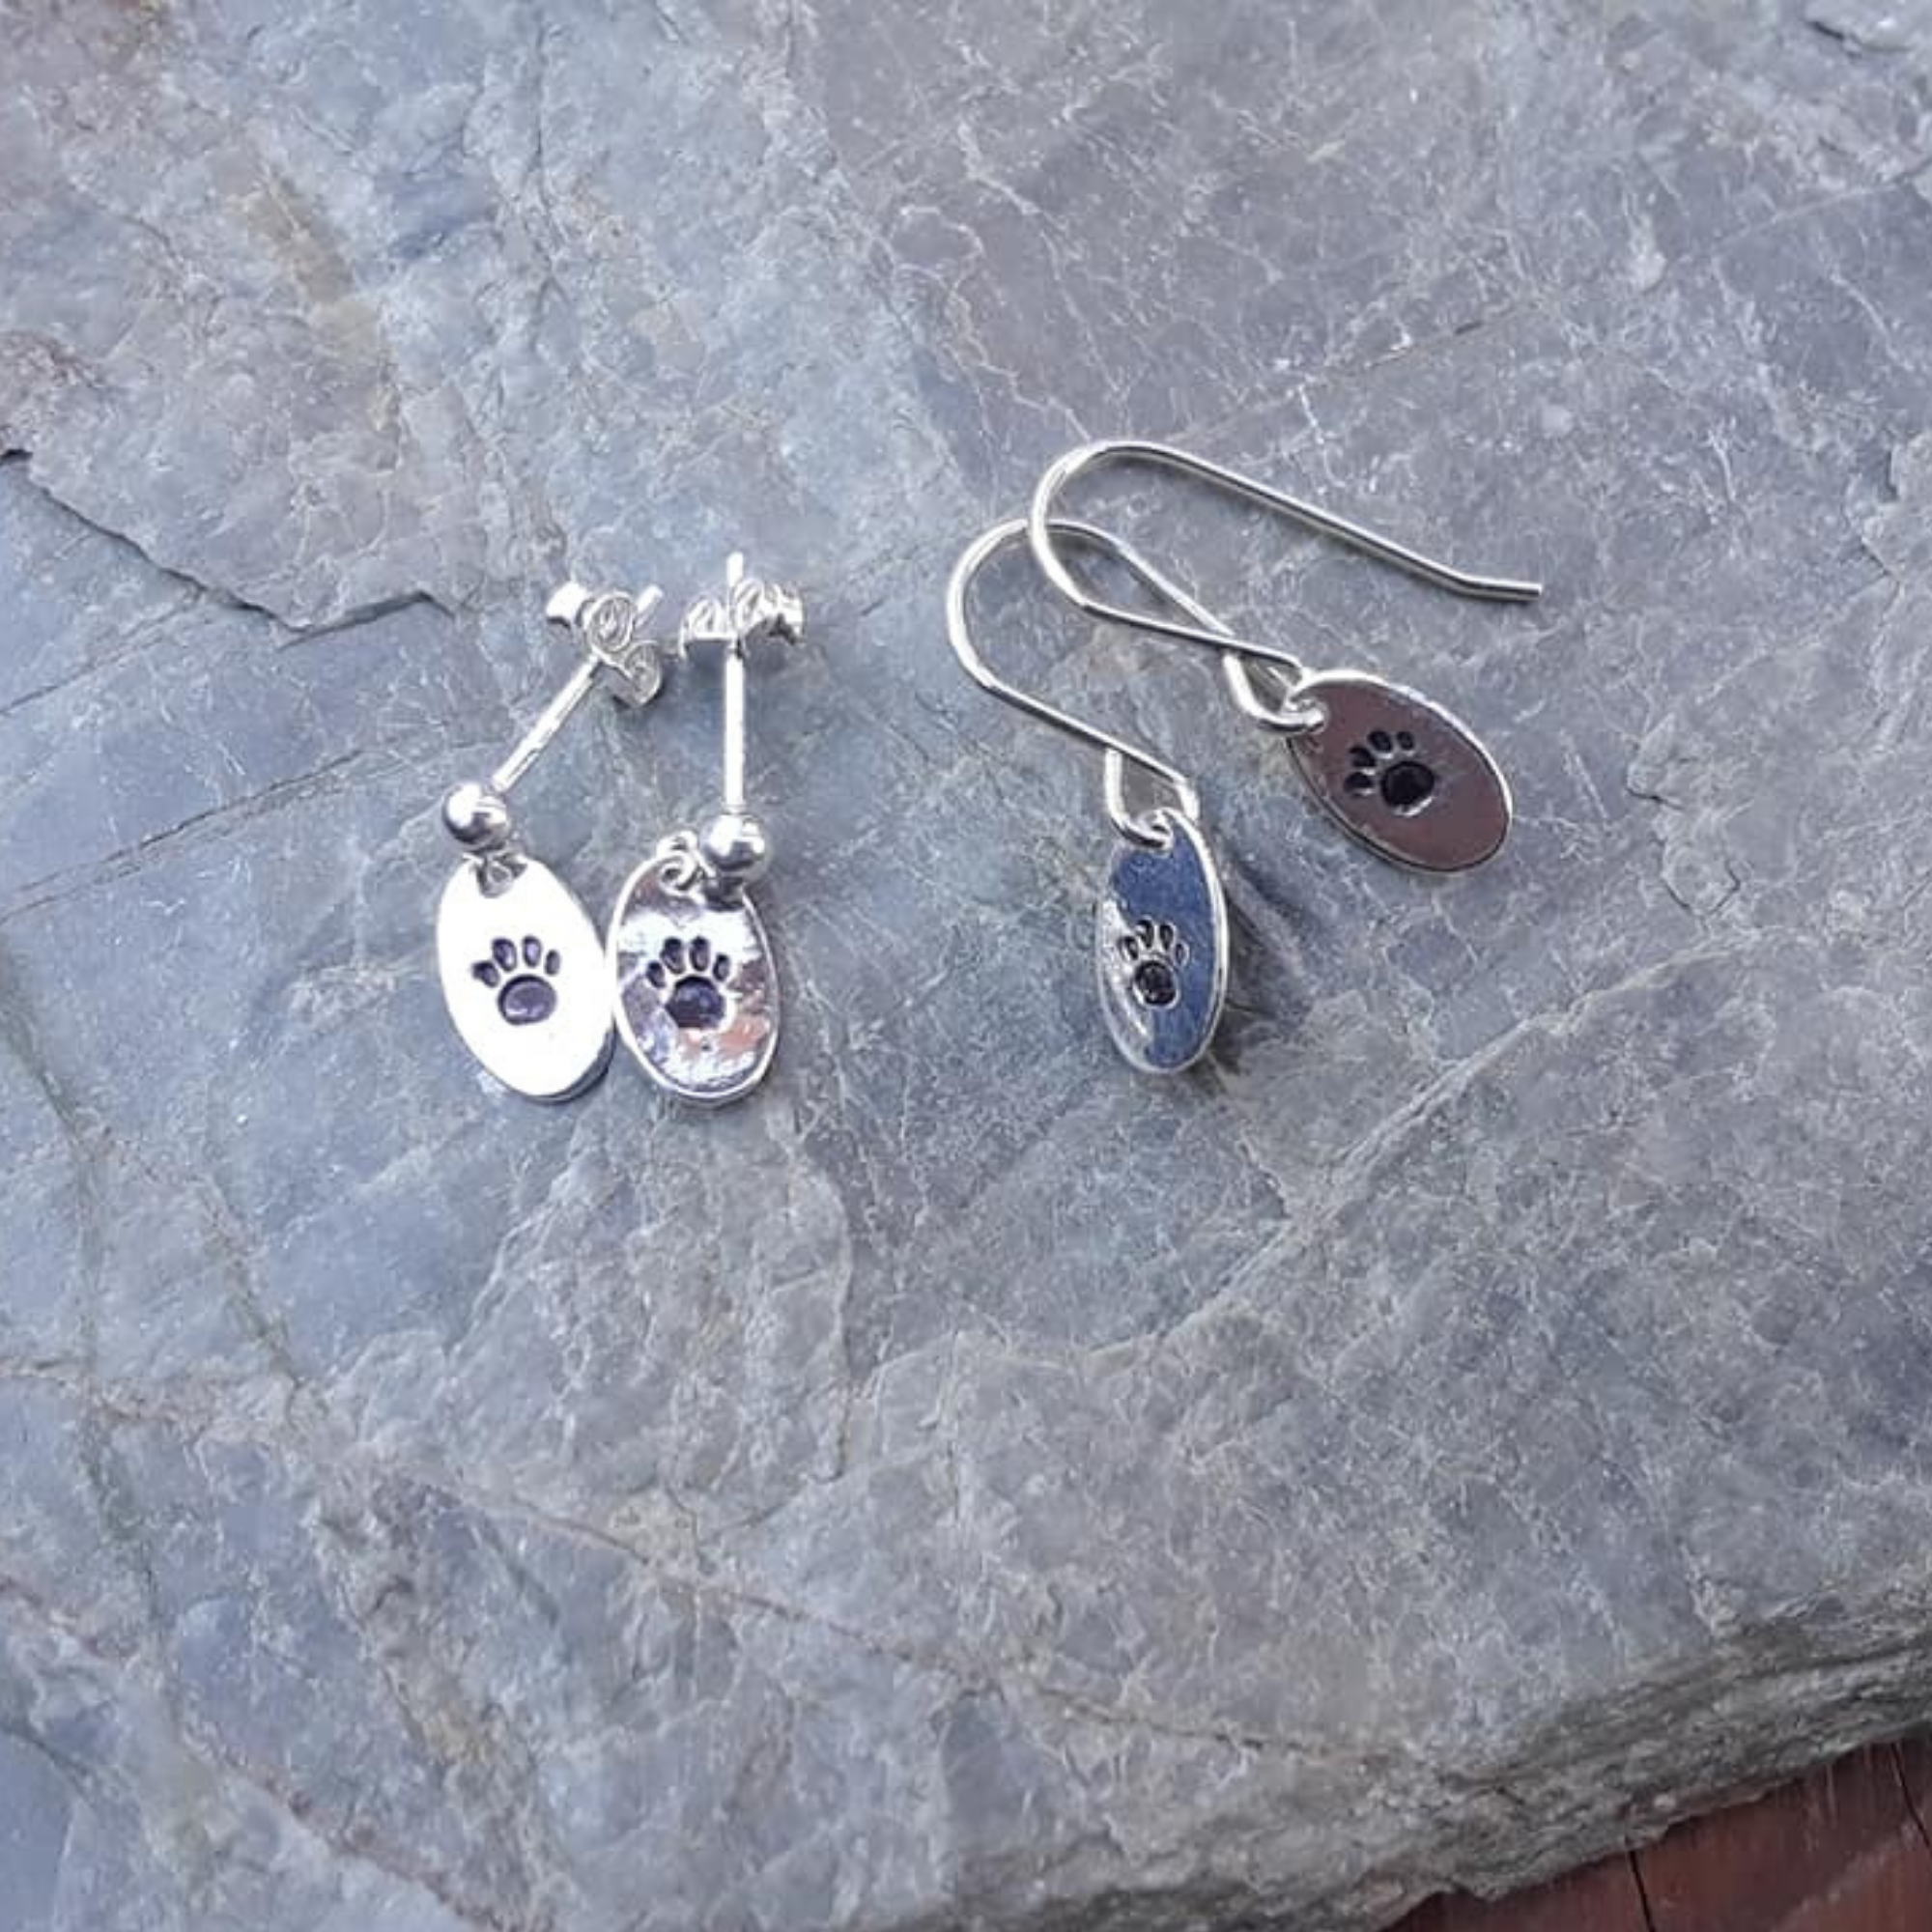 Tiny Paws Stamped Earrings